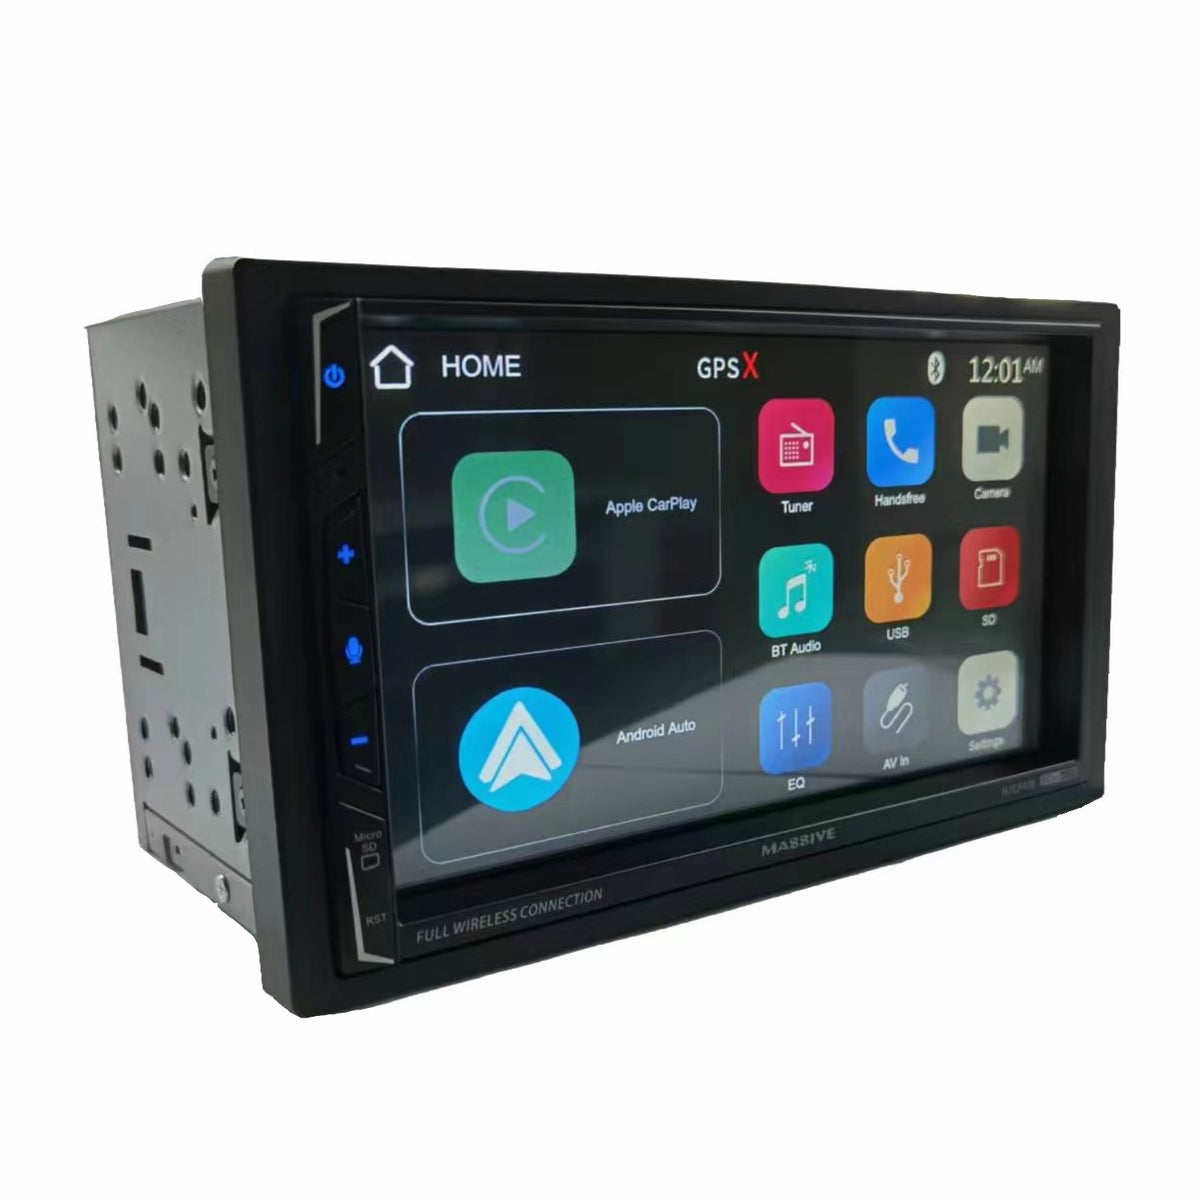 US Android 10 7Apple Carplay Car Radio Bluetooth Stereo Touch Screen  Double DIN